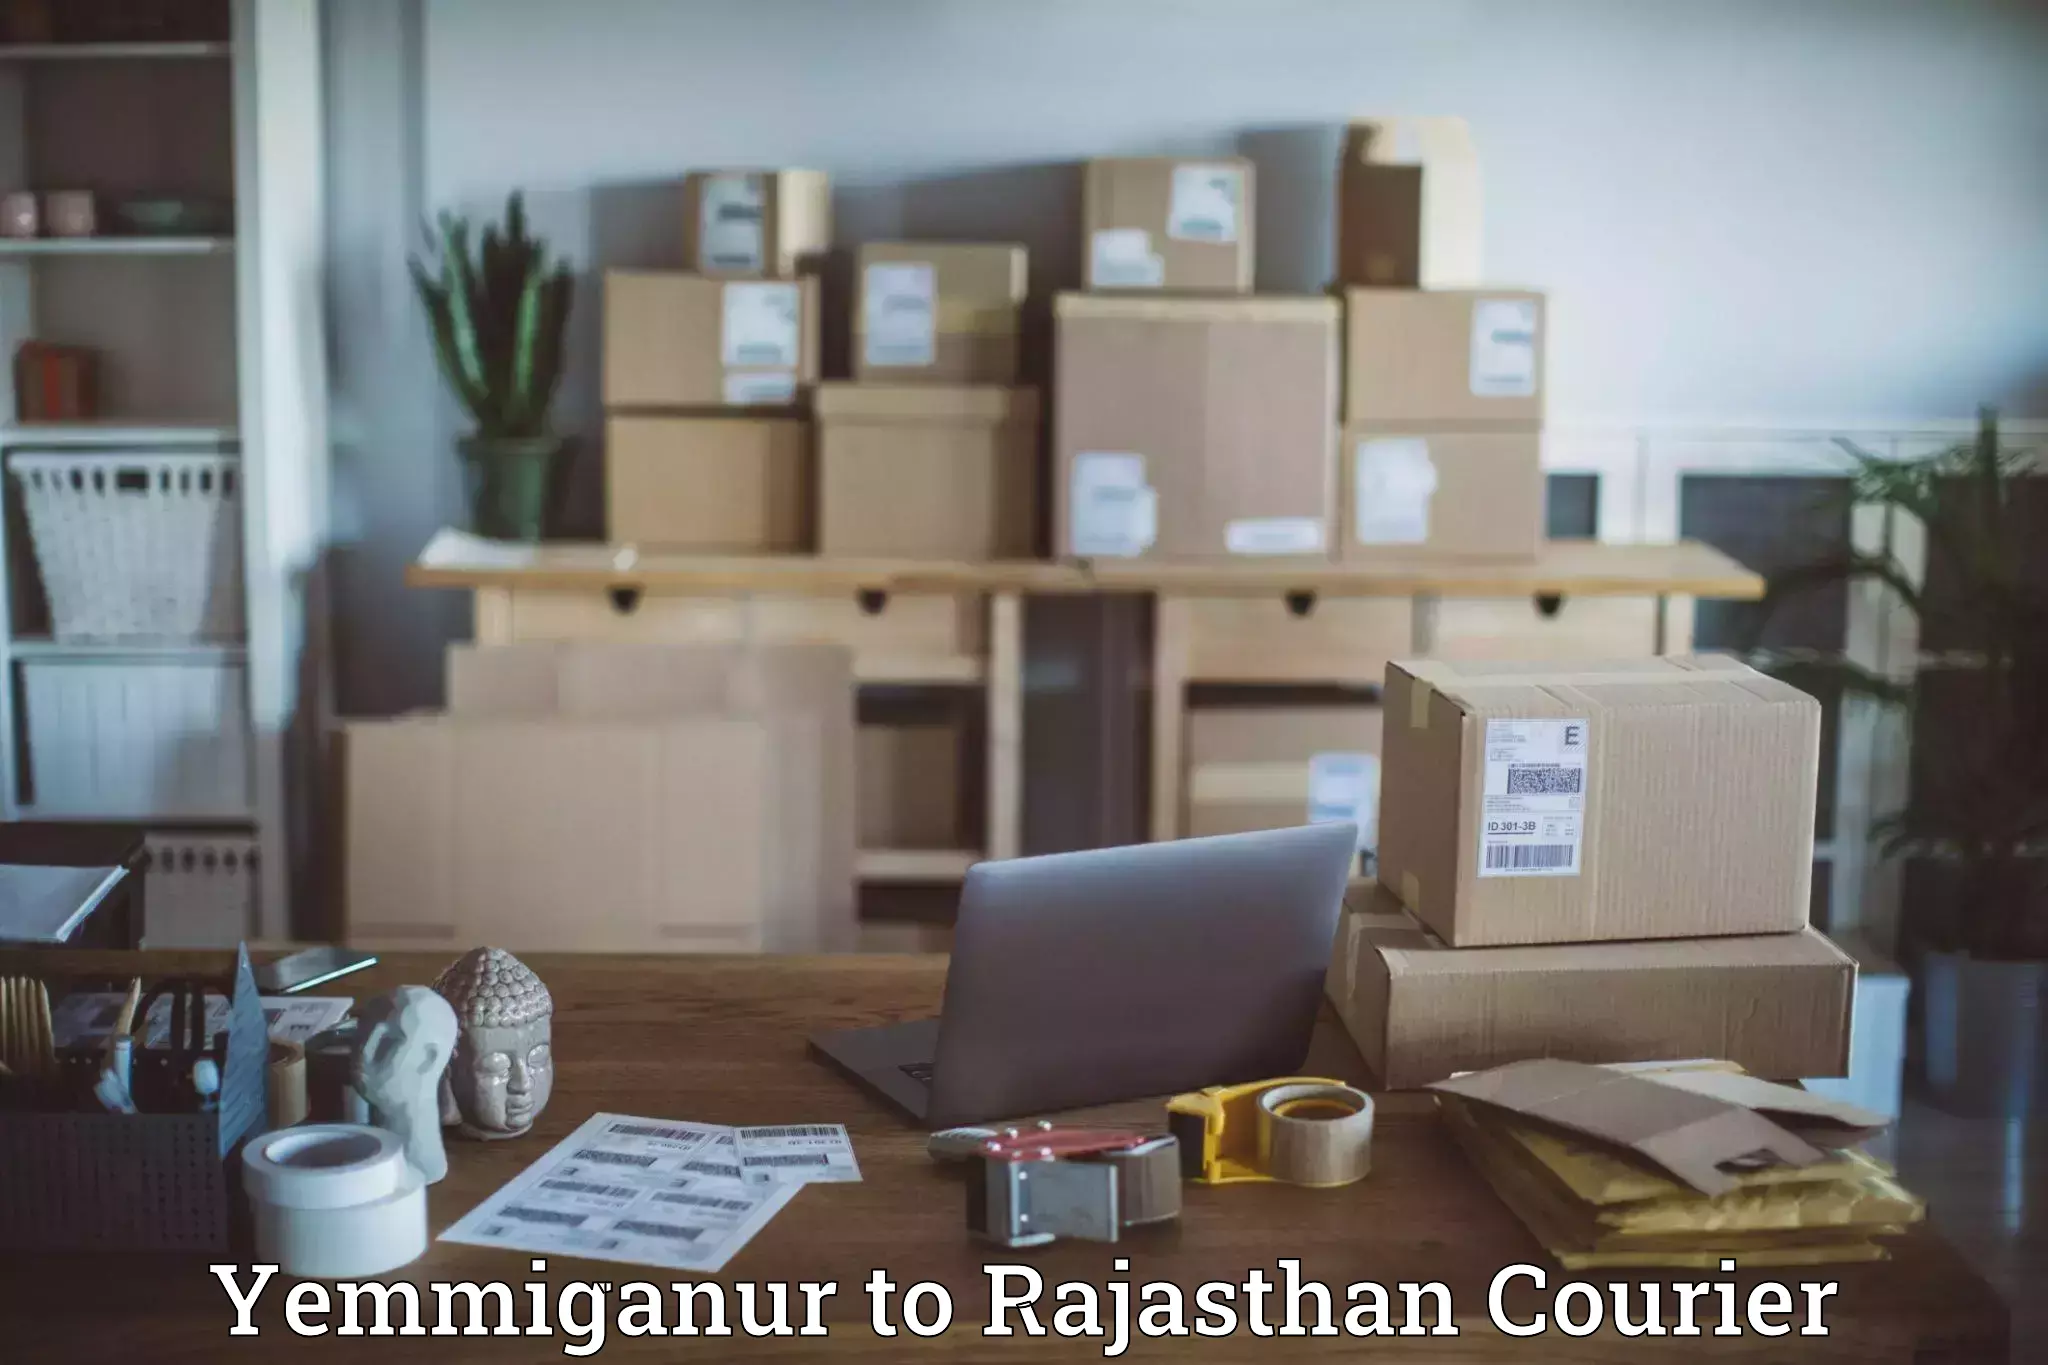 Custom courier packaging in Yemmiganur to Pilani